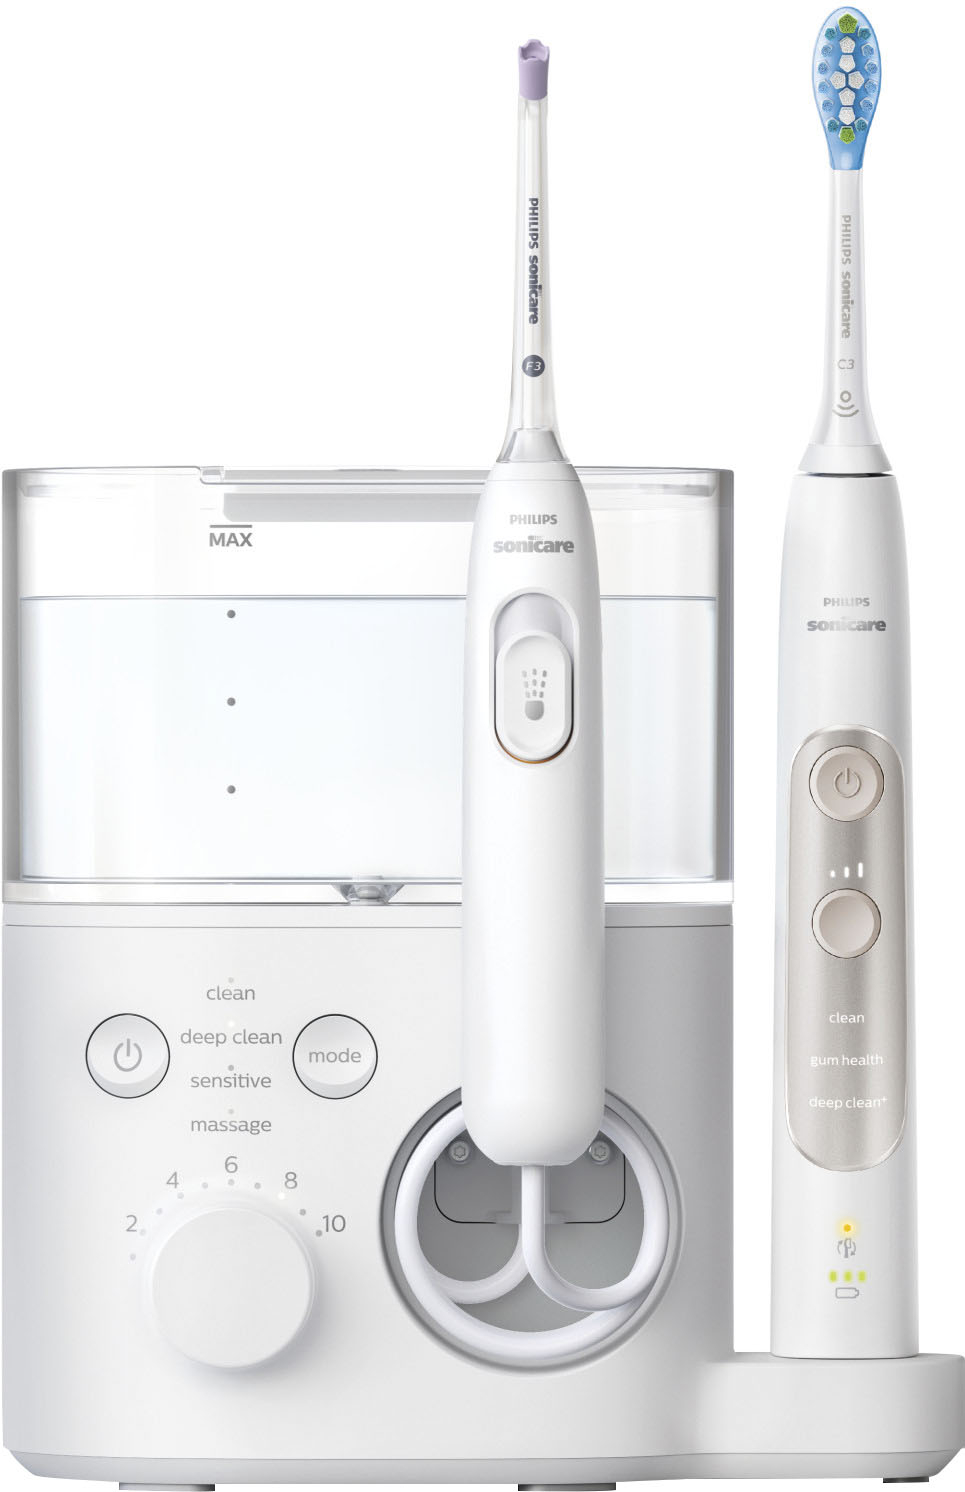 Dynamics Opgive tiger Philips Sonicare Power Flosser & Toothbrush System 7000, HX3921 White  HX3921/40 - Best Buy